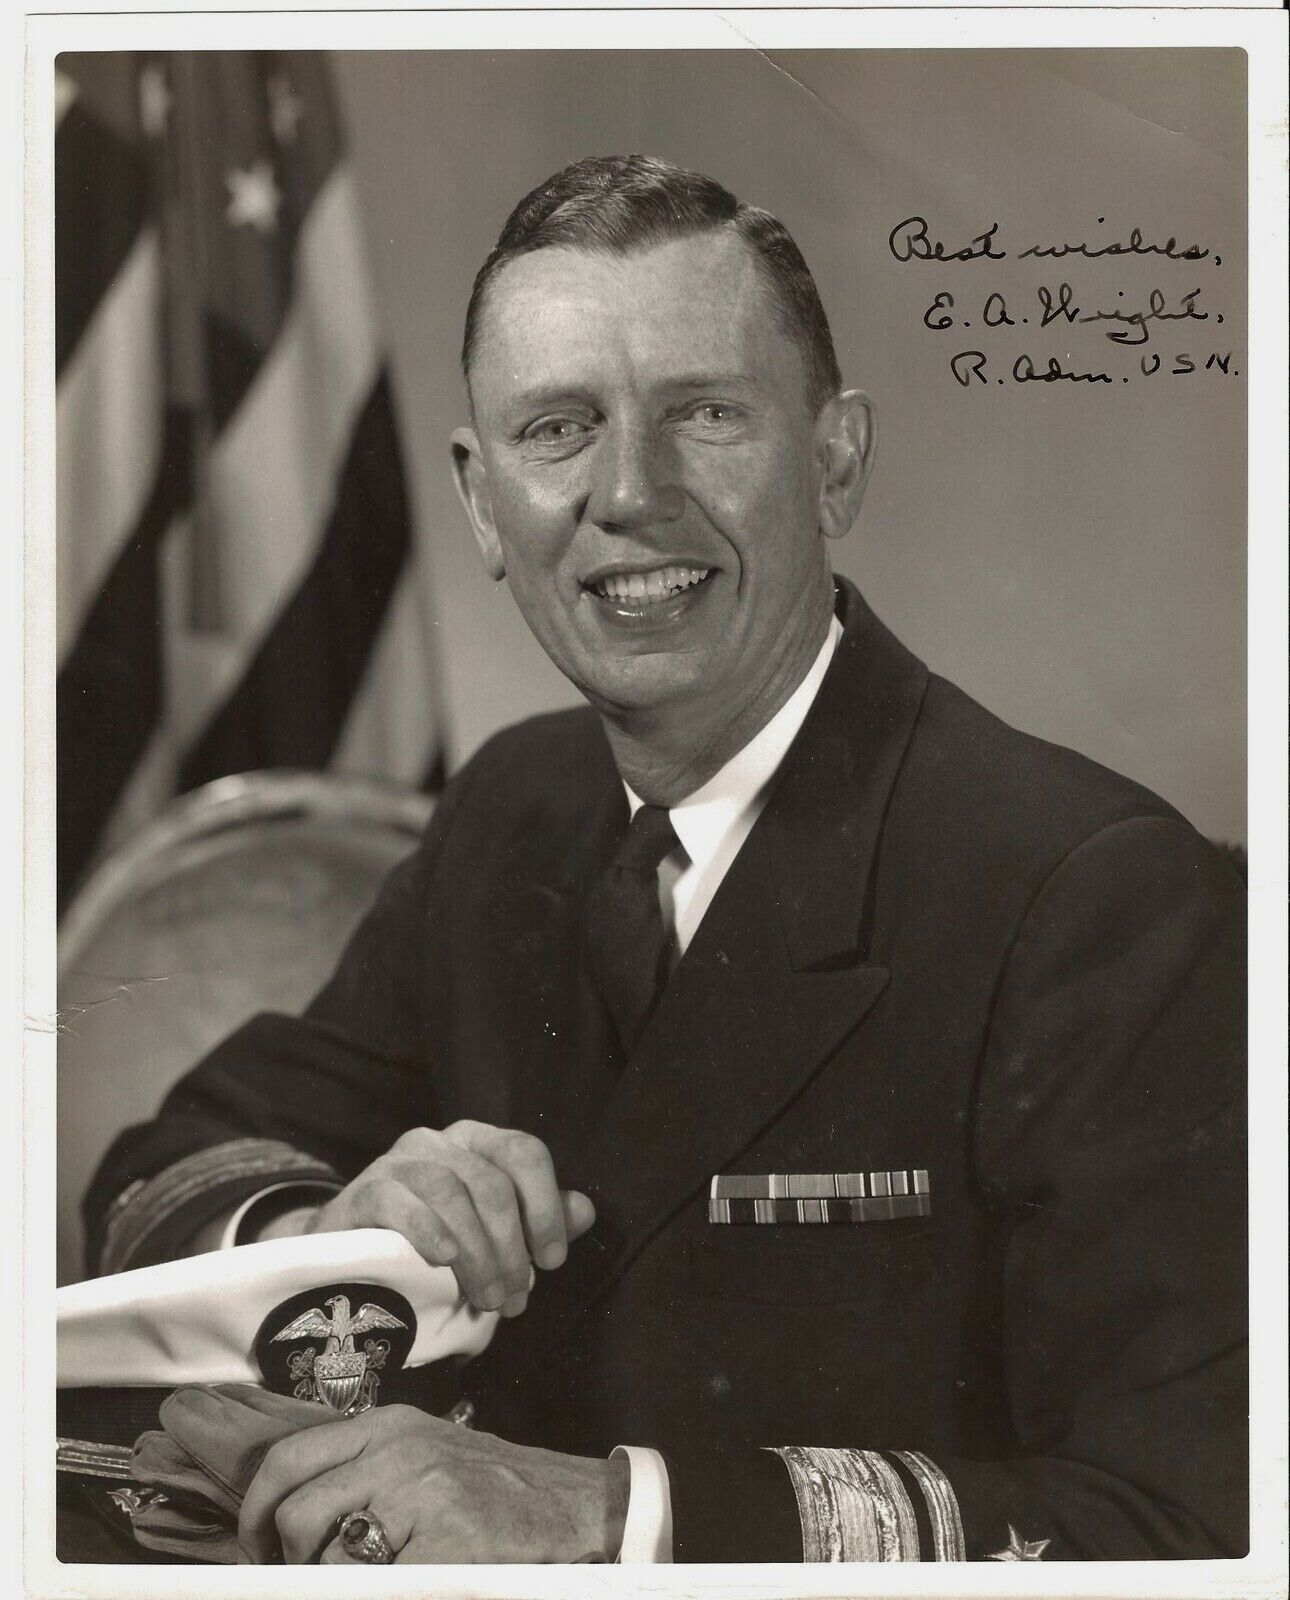 E.A. WRIGHT, REAR ADMIRAL, U.S. NAVY, HAND SIGNED AUTOGRAPH PHOTO & MEMO USN